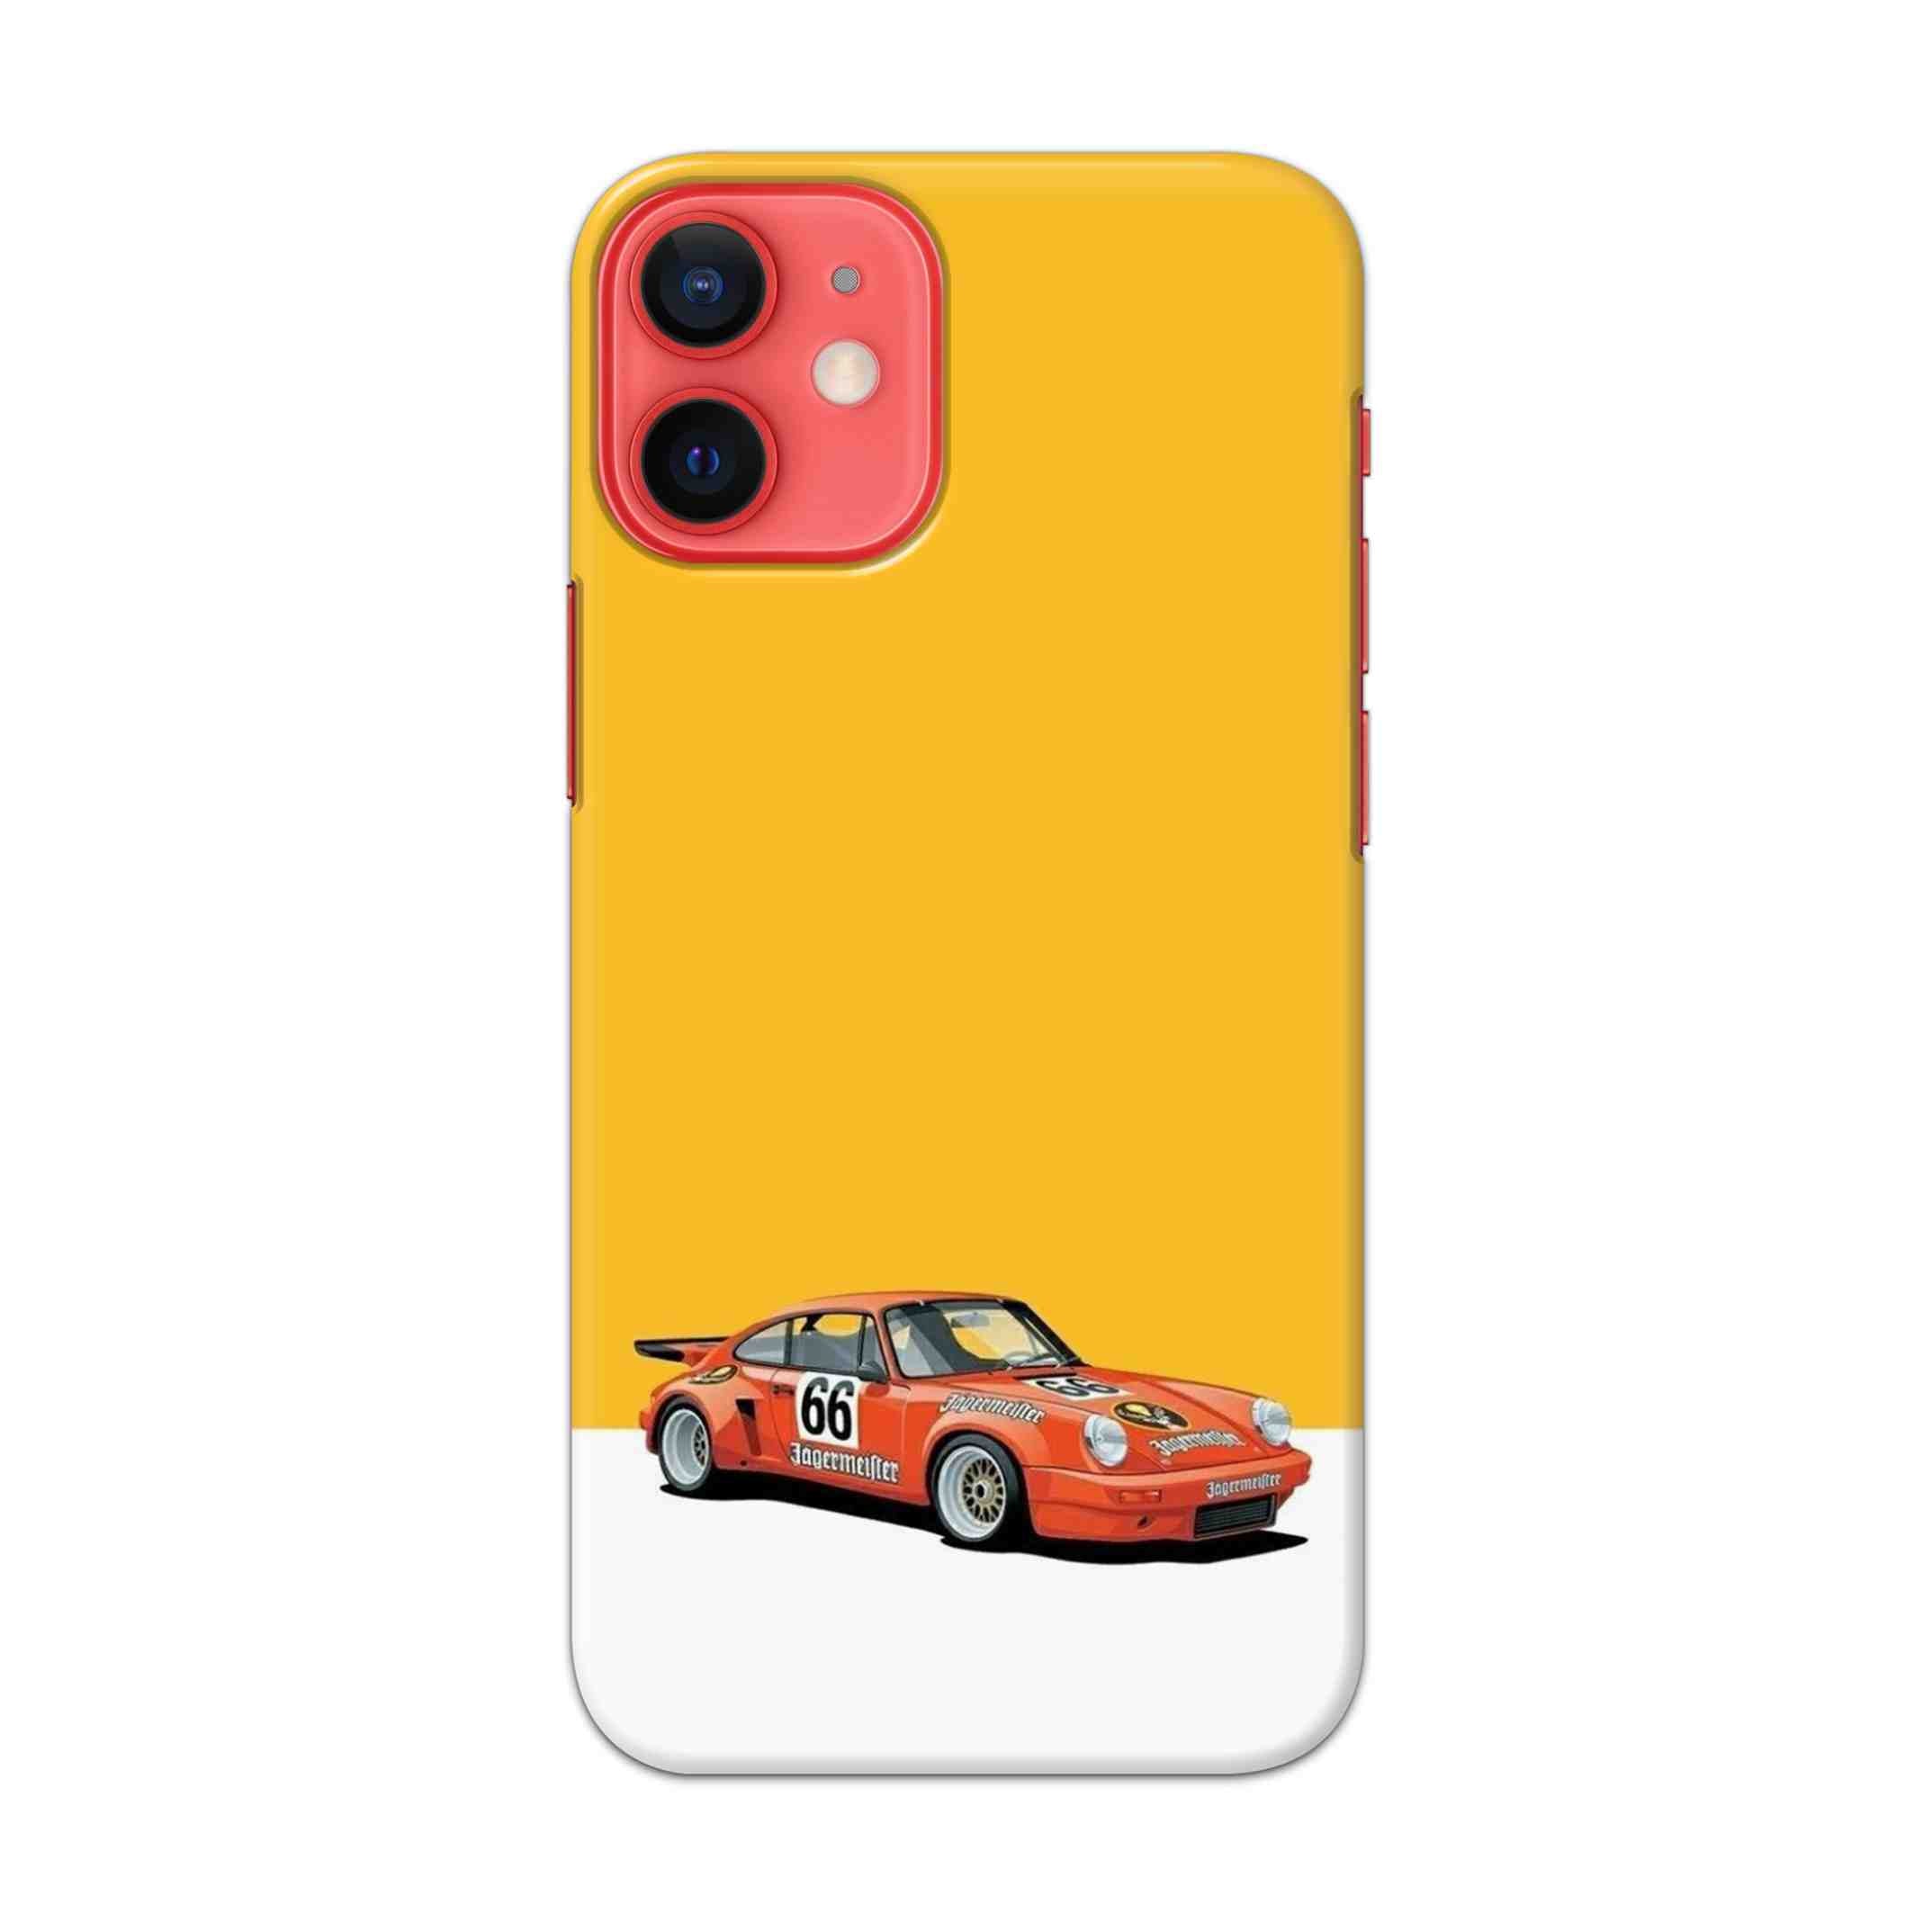 Buy Porche Hard Back Mobile Phone Case/Cover For Apple iPhone 12 mini Online